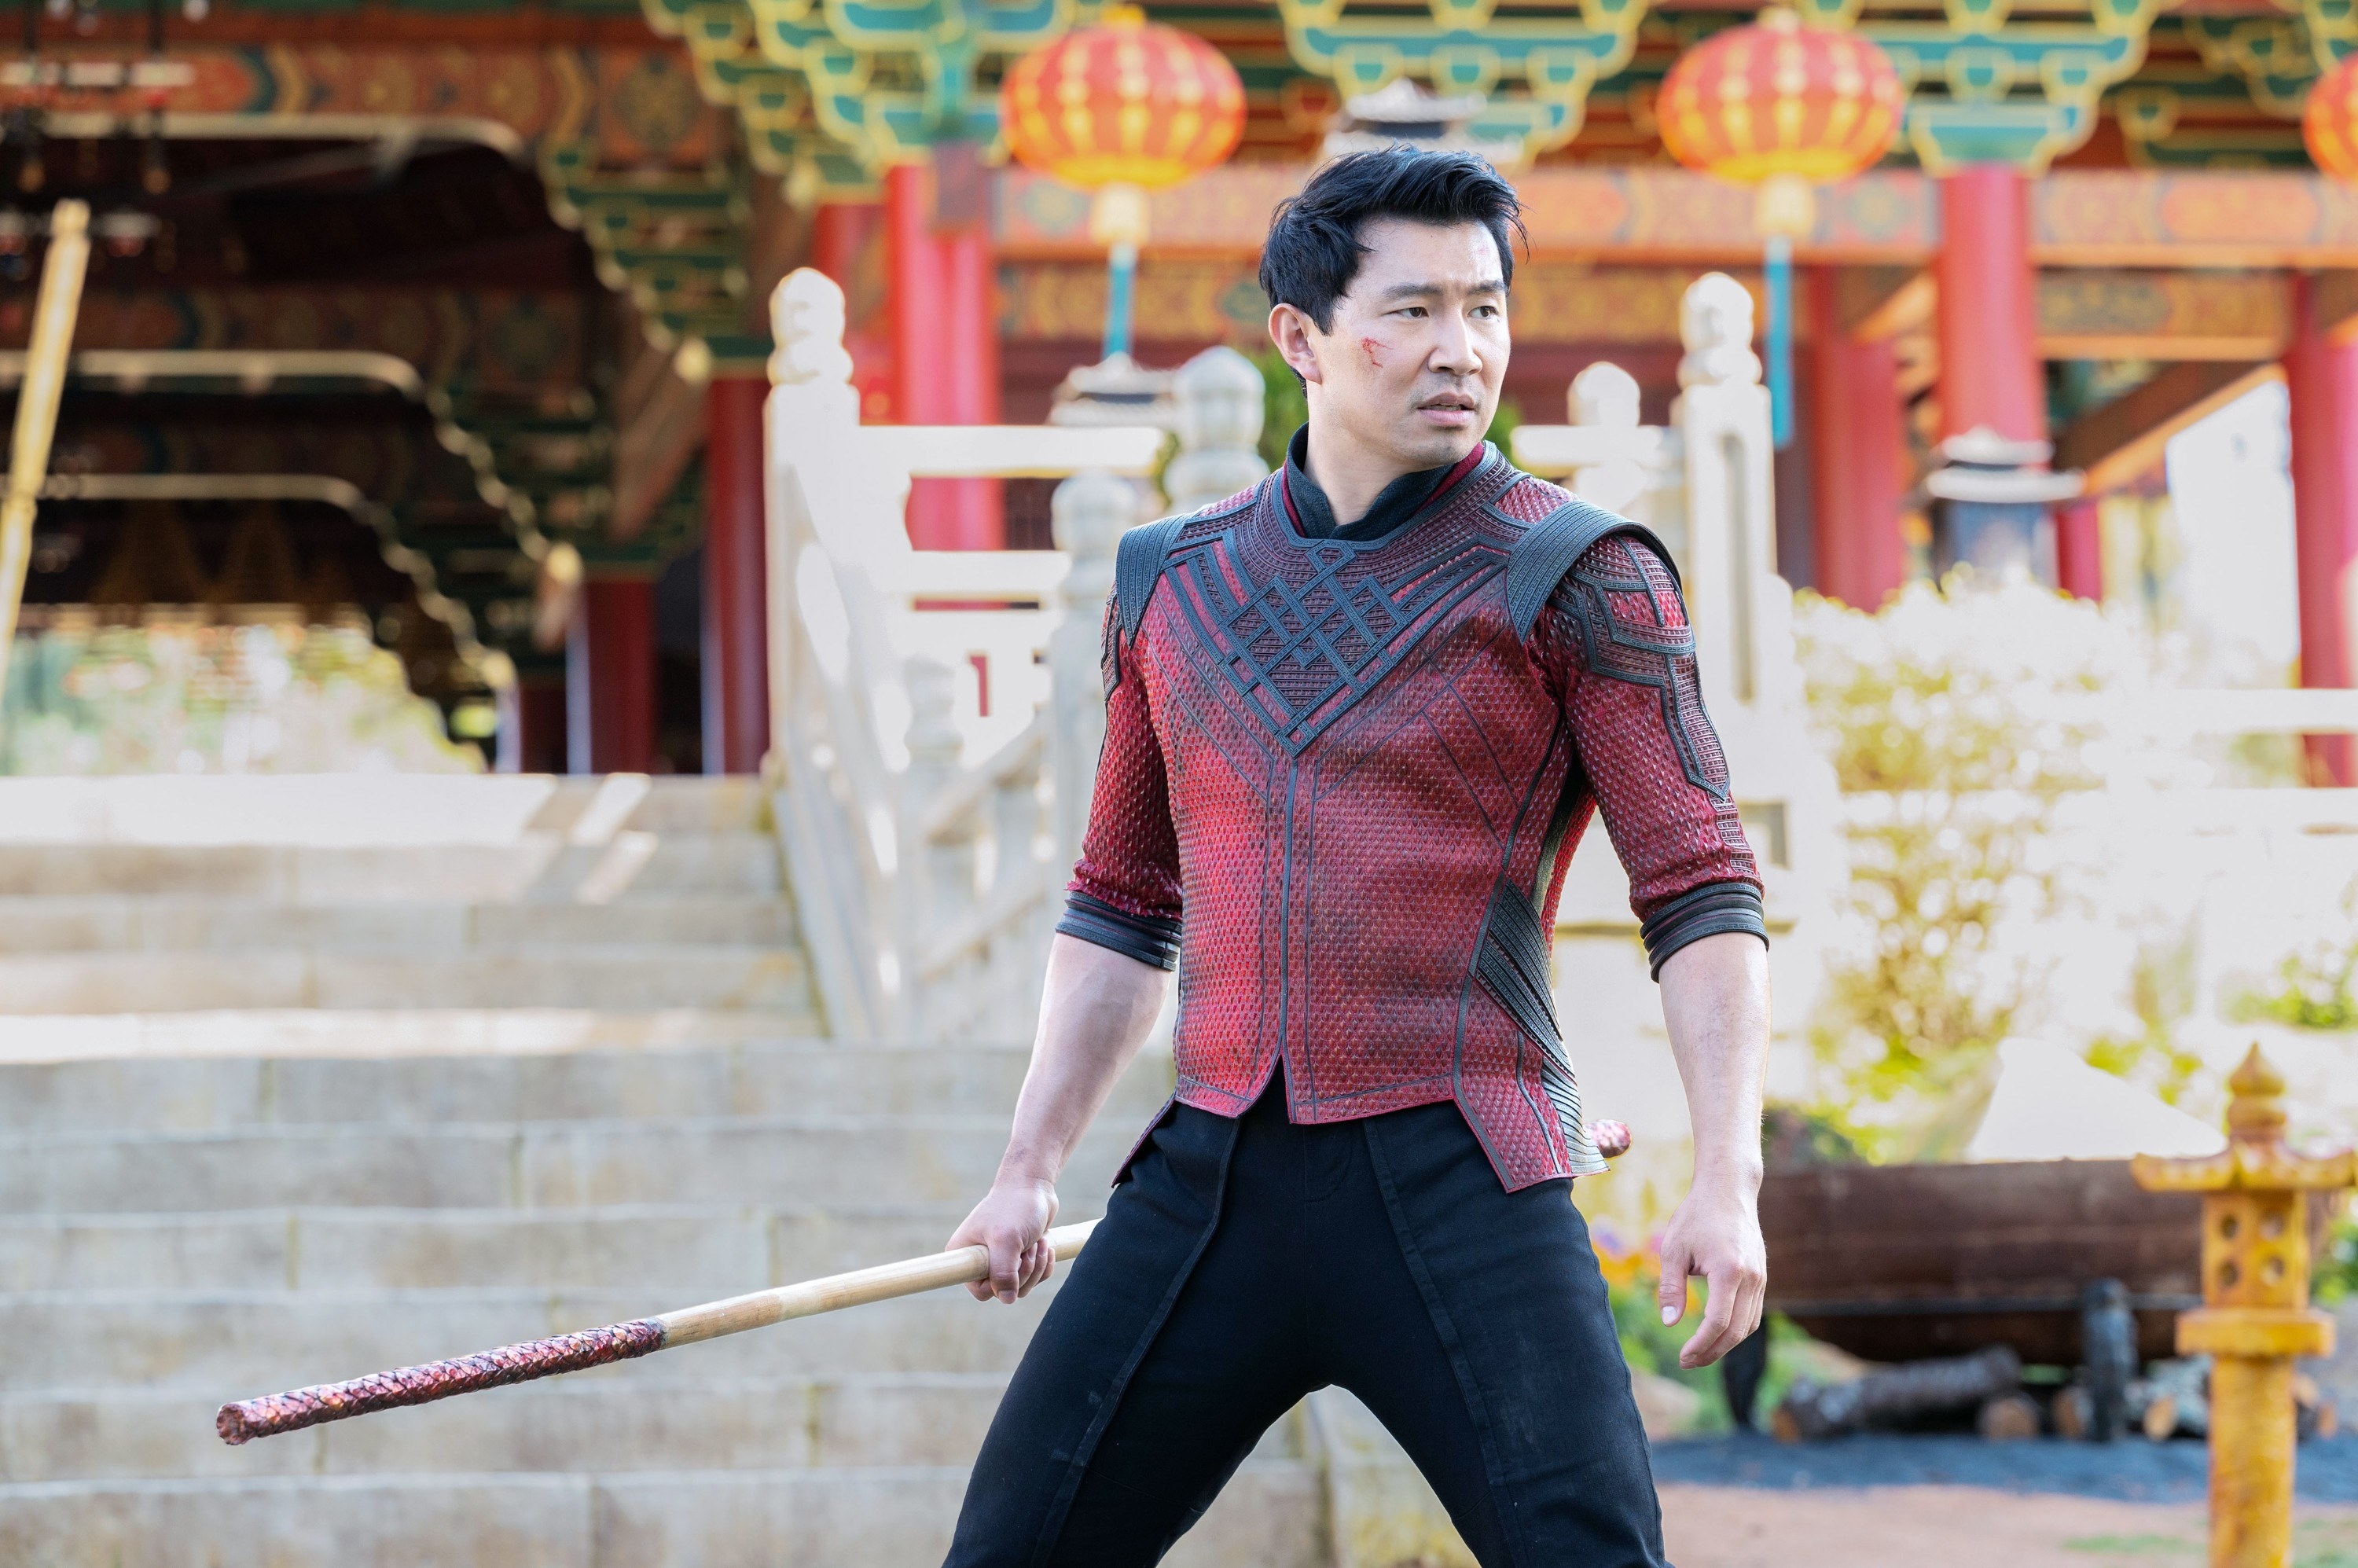 Simu as Shang-Chi in a fight stance during a scene from Shang-Chi and the Legend of the Ten Rings